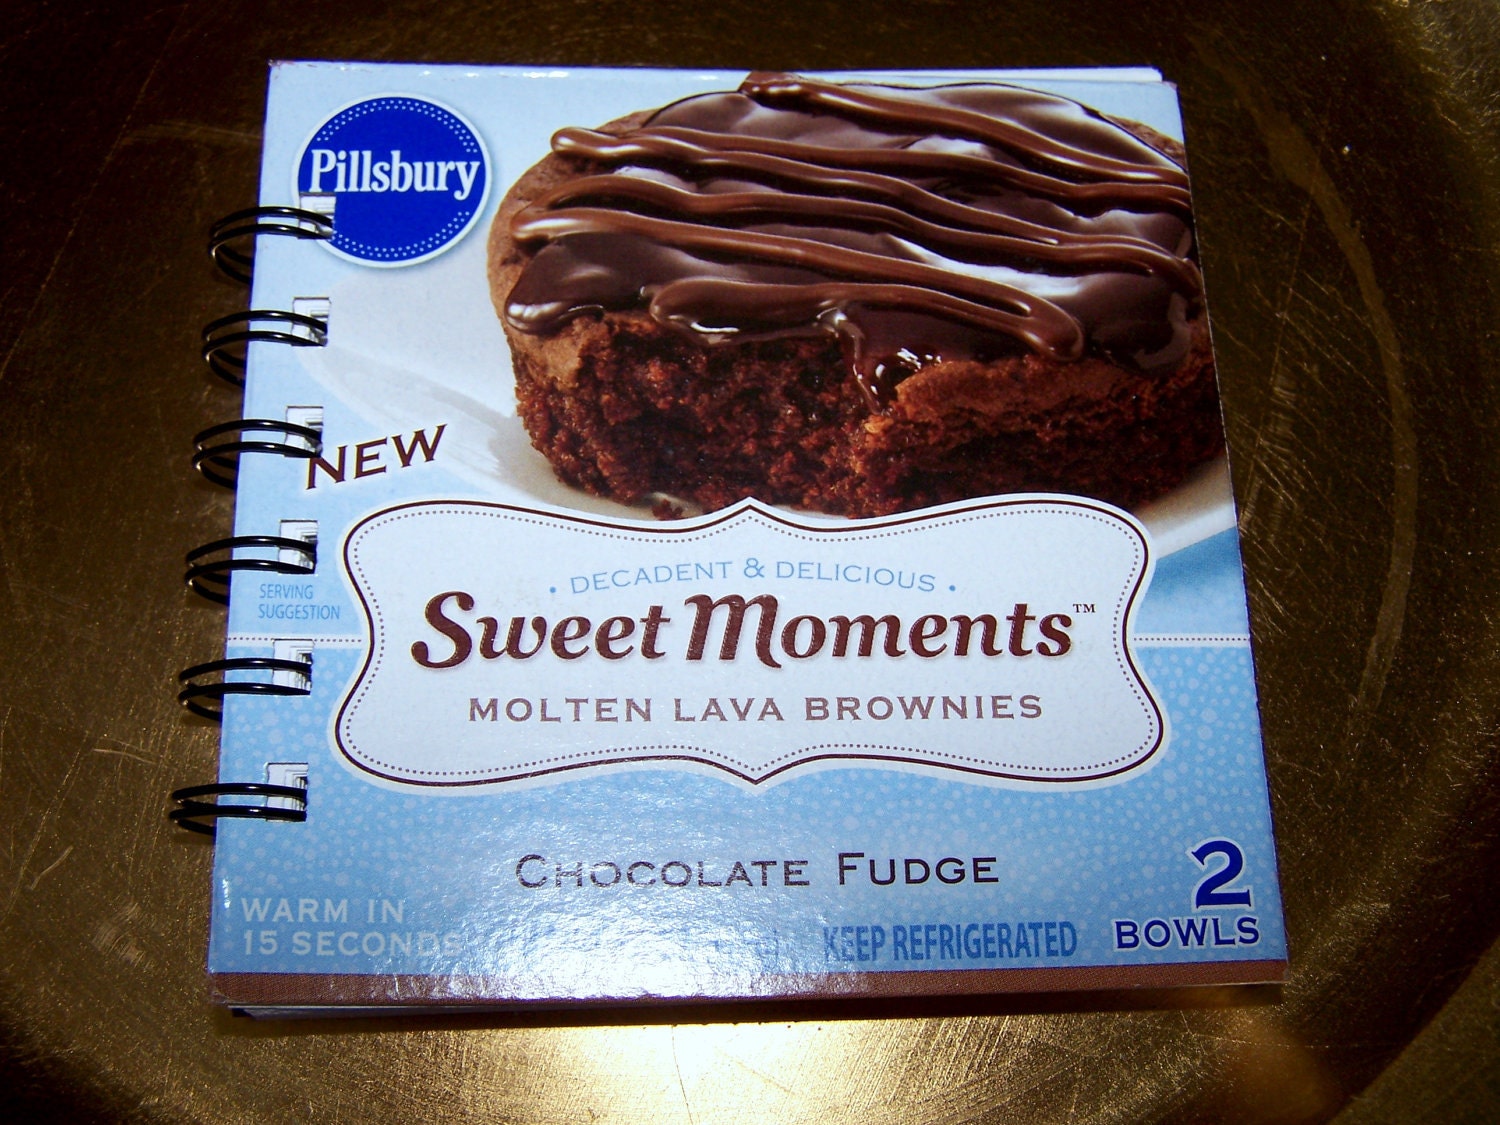 Upcycled Notebook Upcycled Notepad: PILLSBURY SWEET MOMENTS Molten Lava Brownies Recycled 50 Page Notebook-Spiral Bound